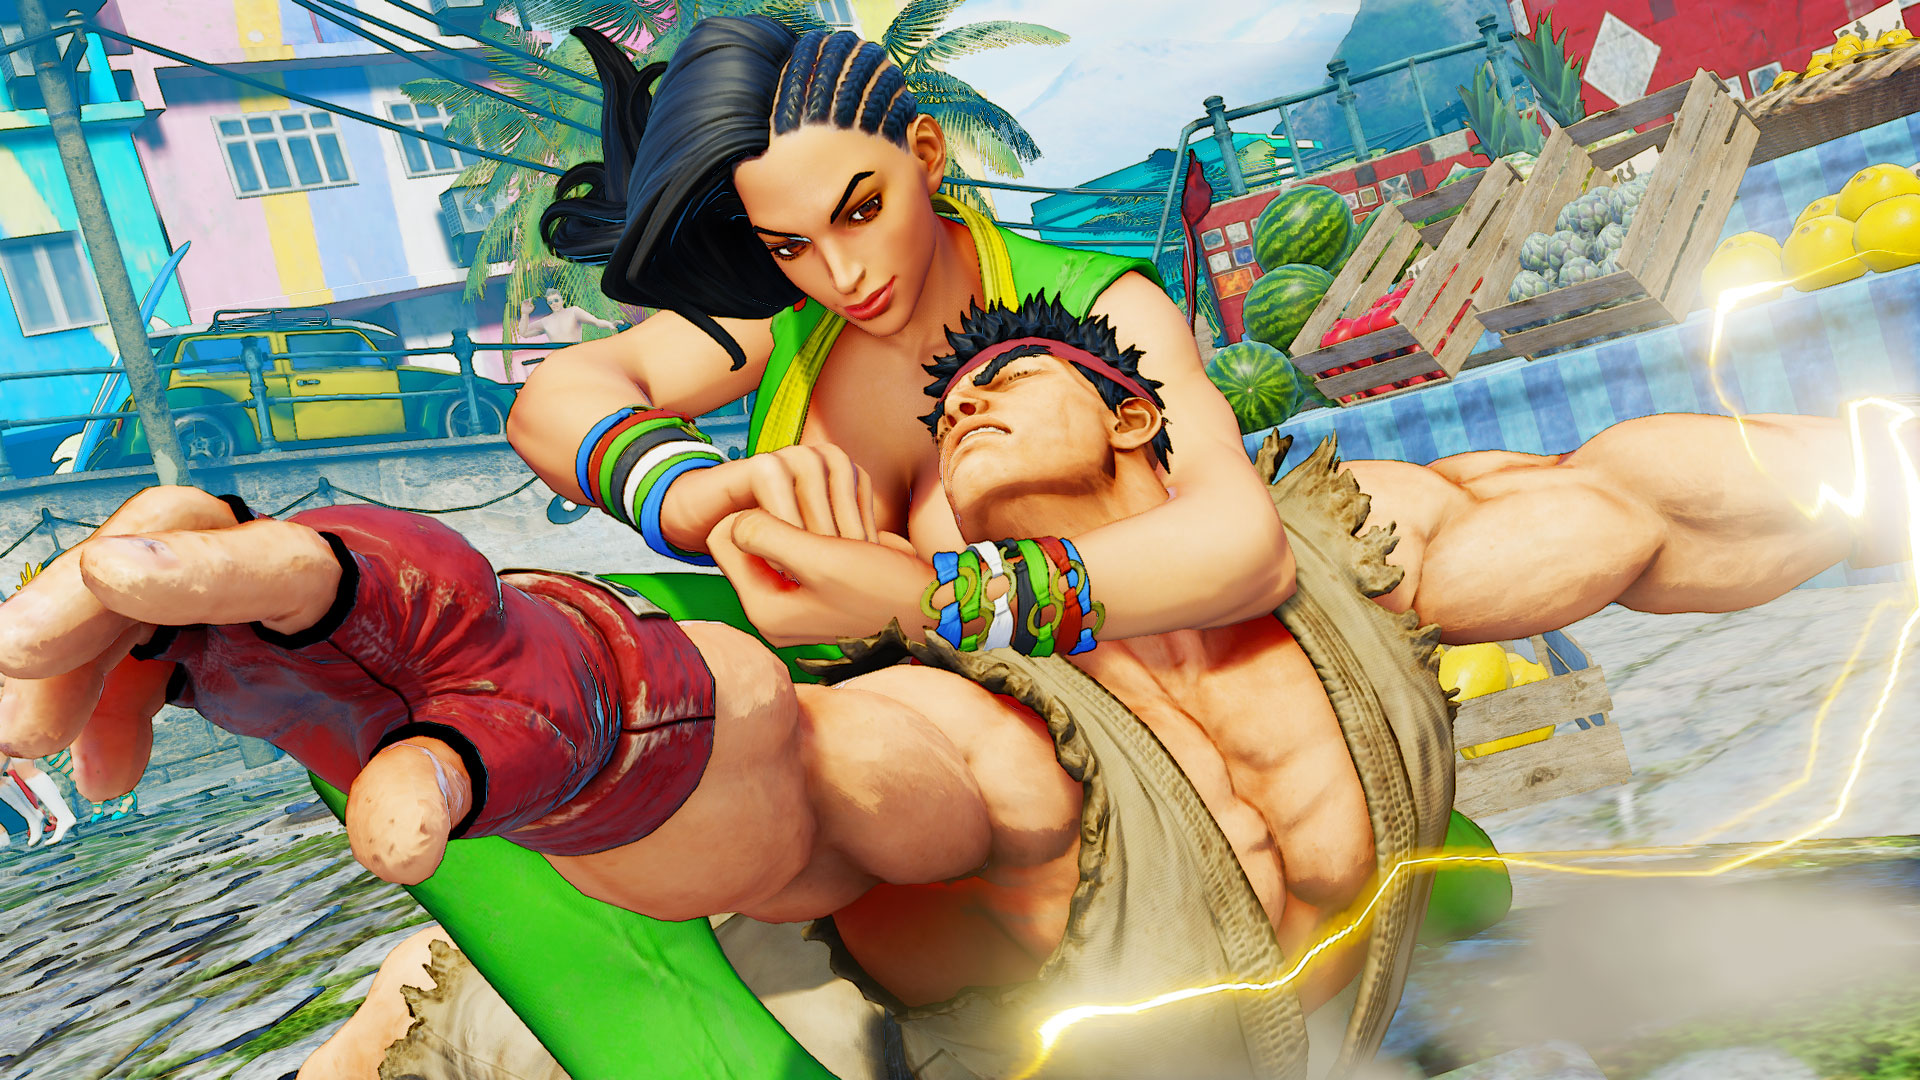 Street Fighter V's Never Coming to Xbox One, Capcom Says